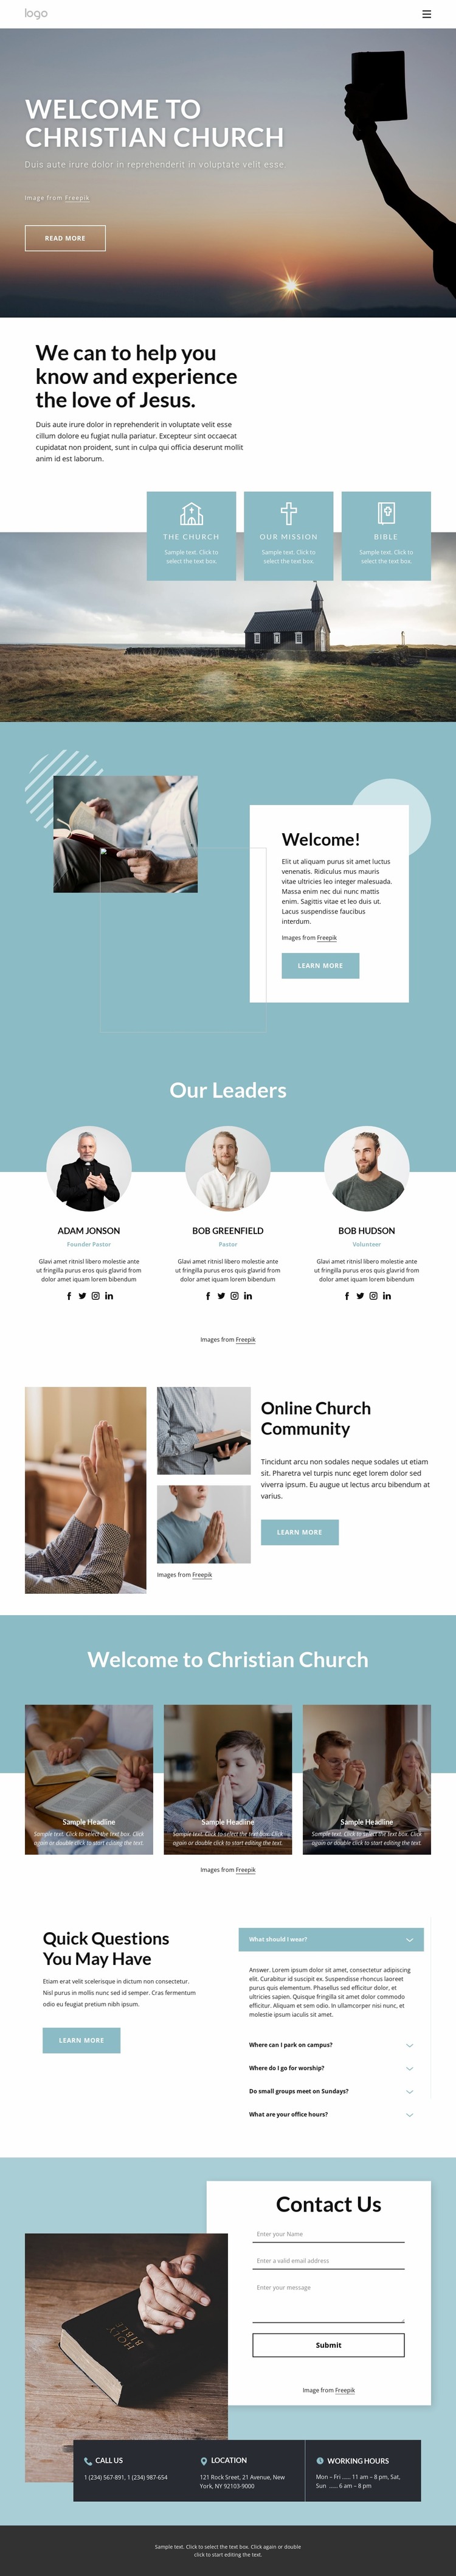 Our Mission, vision and confession Website Mockup